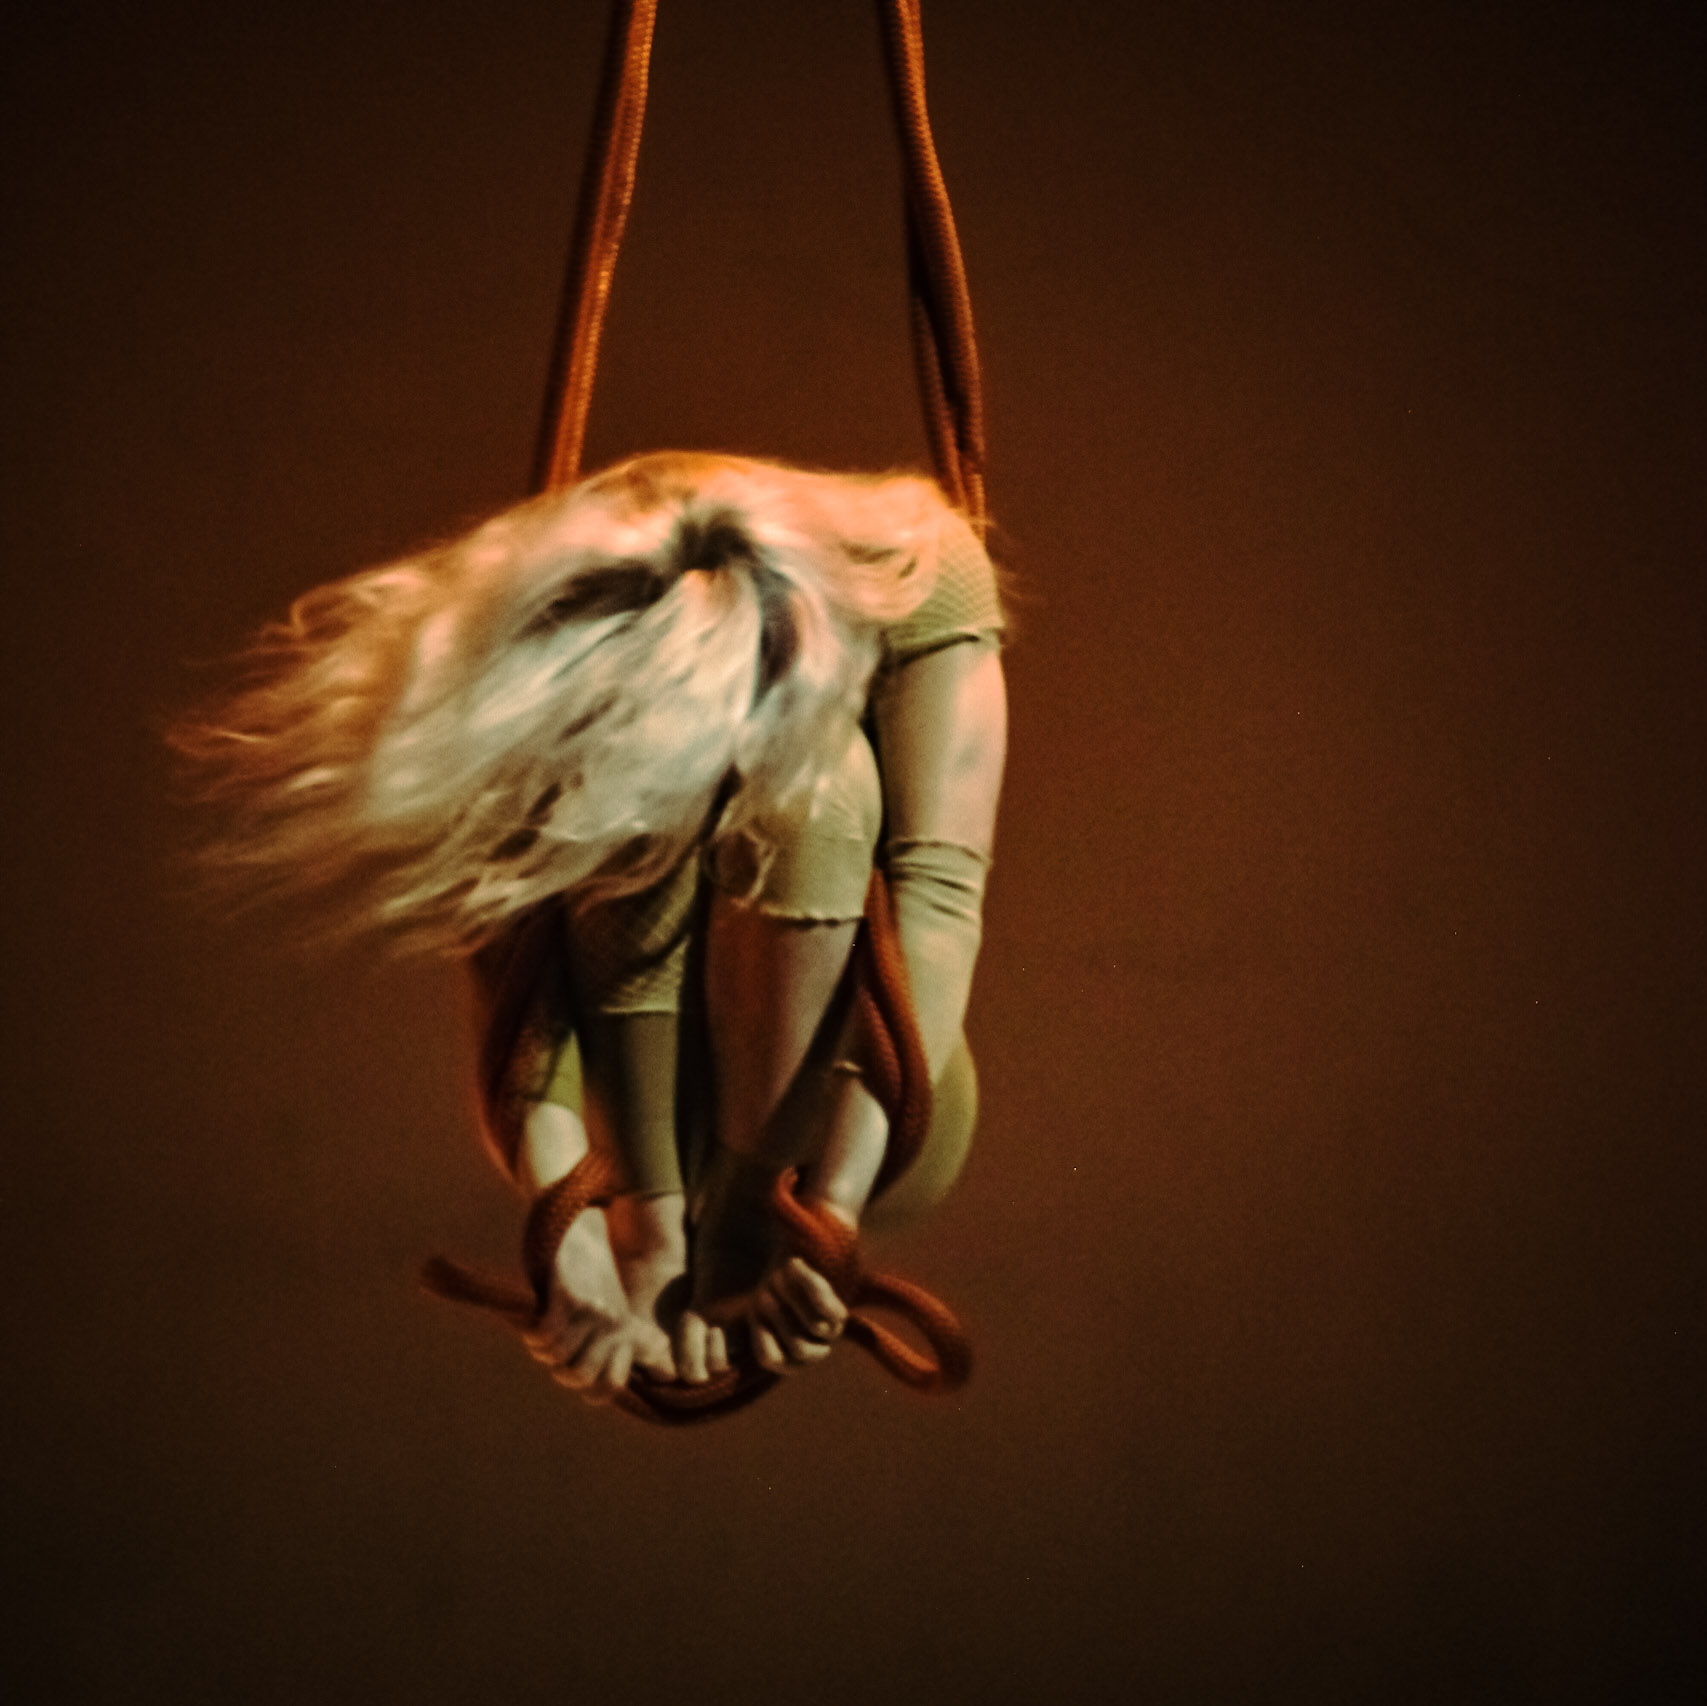 An aerialist spins on red rope loops.